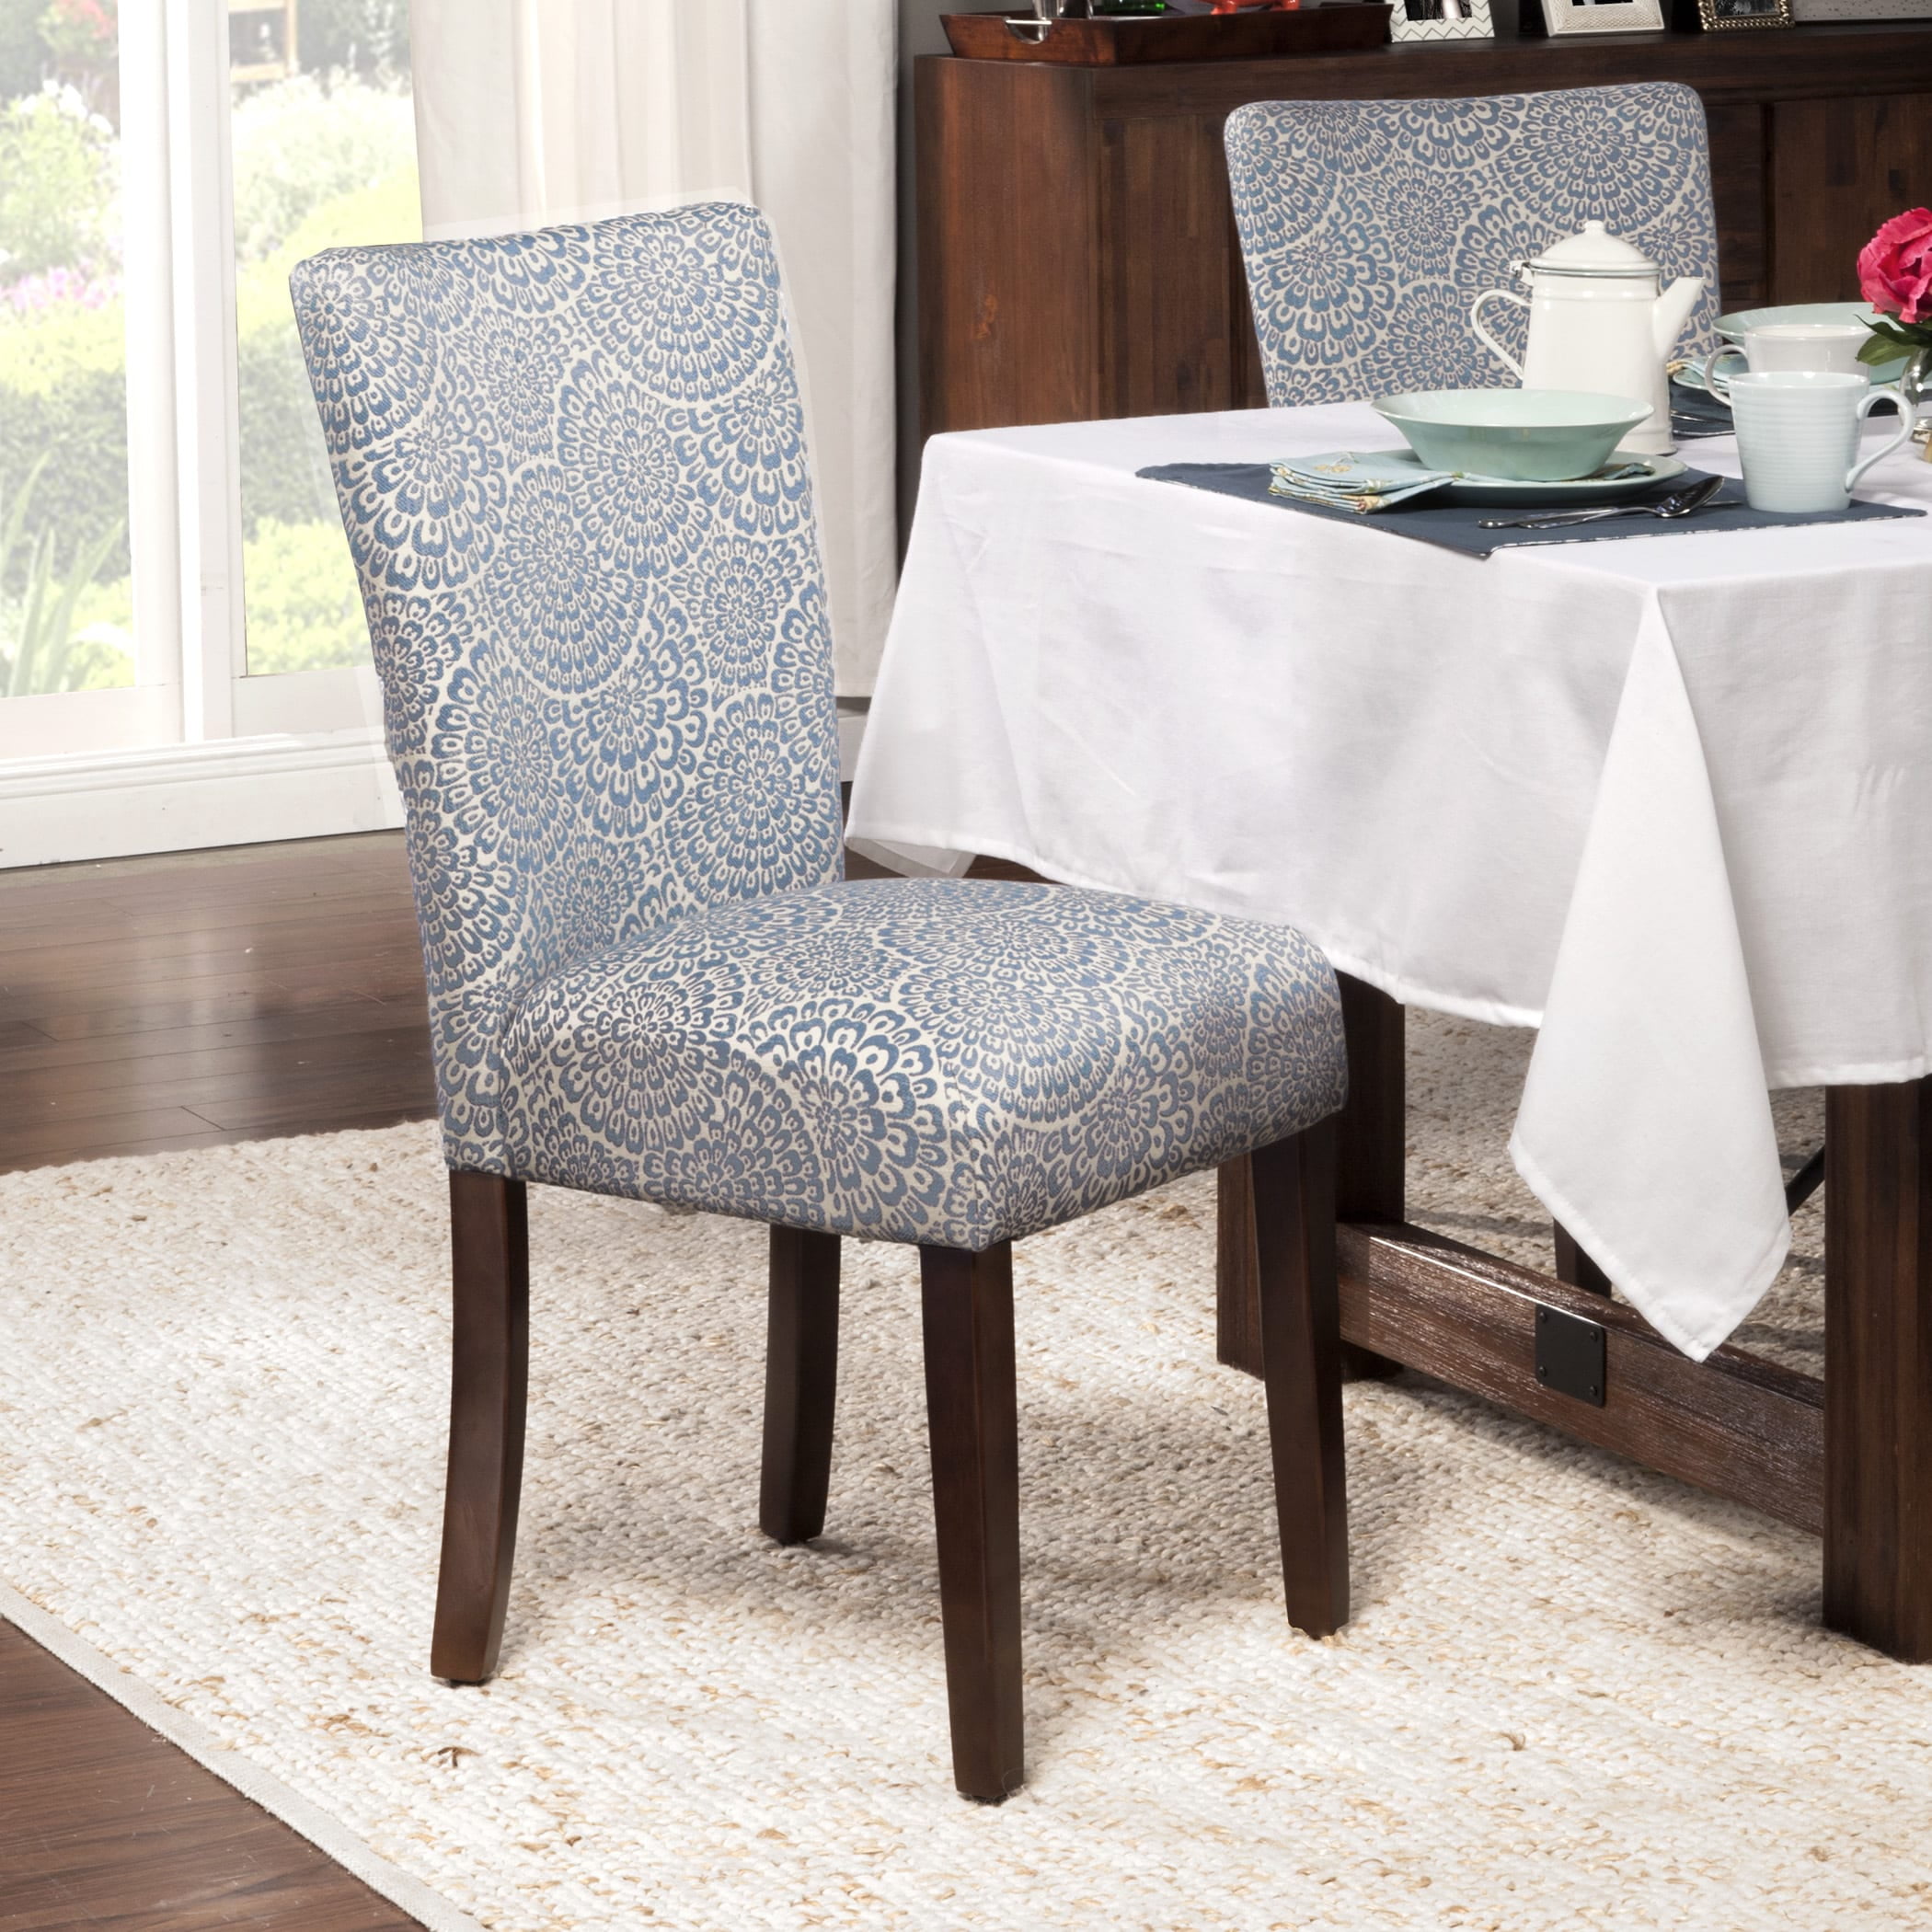 Homepop Parsons Dining Chairs Set Of 2, Navy Blue Parsons Dining Chairs